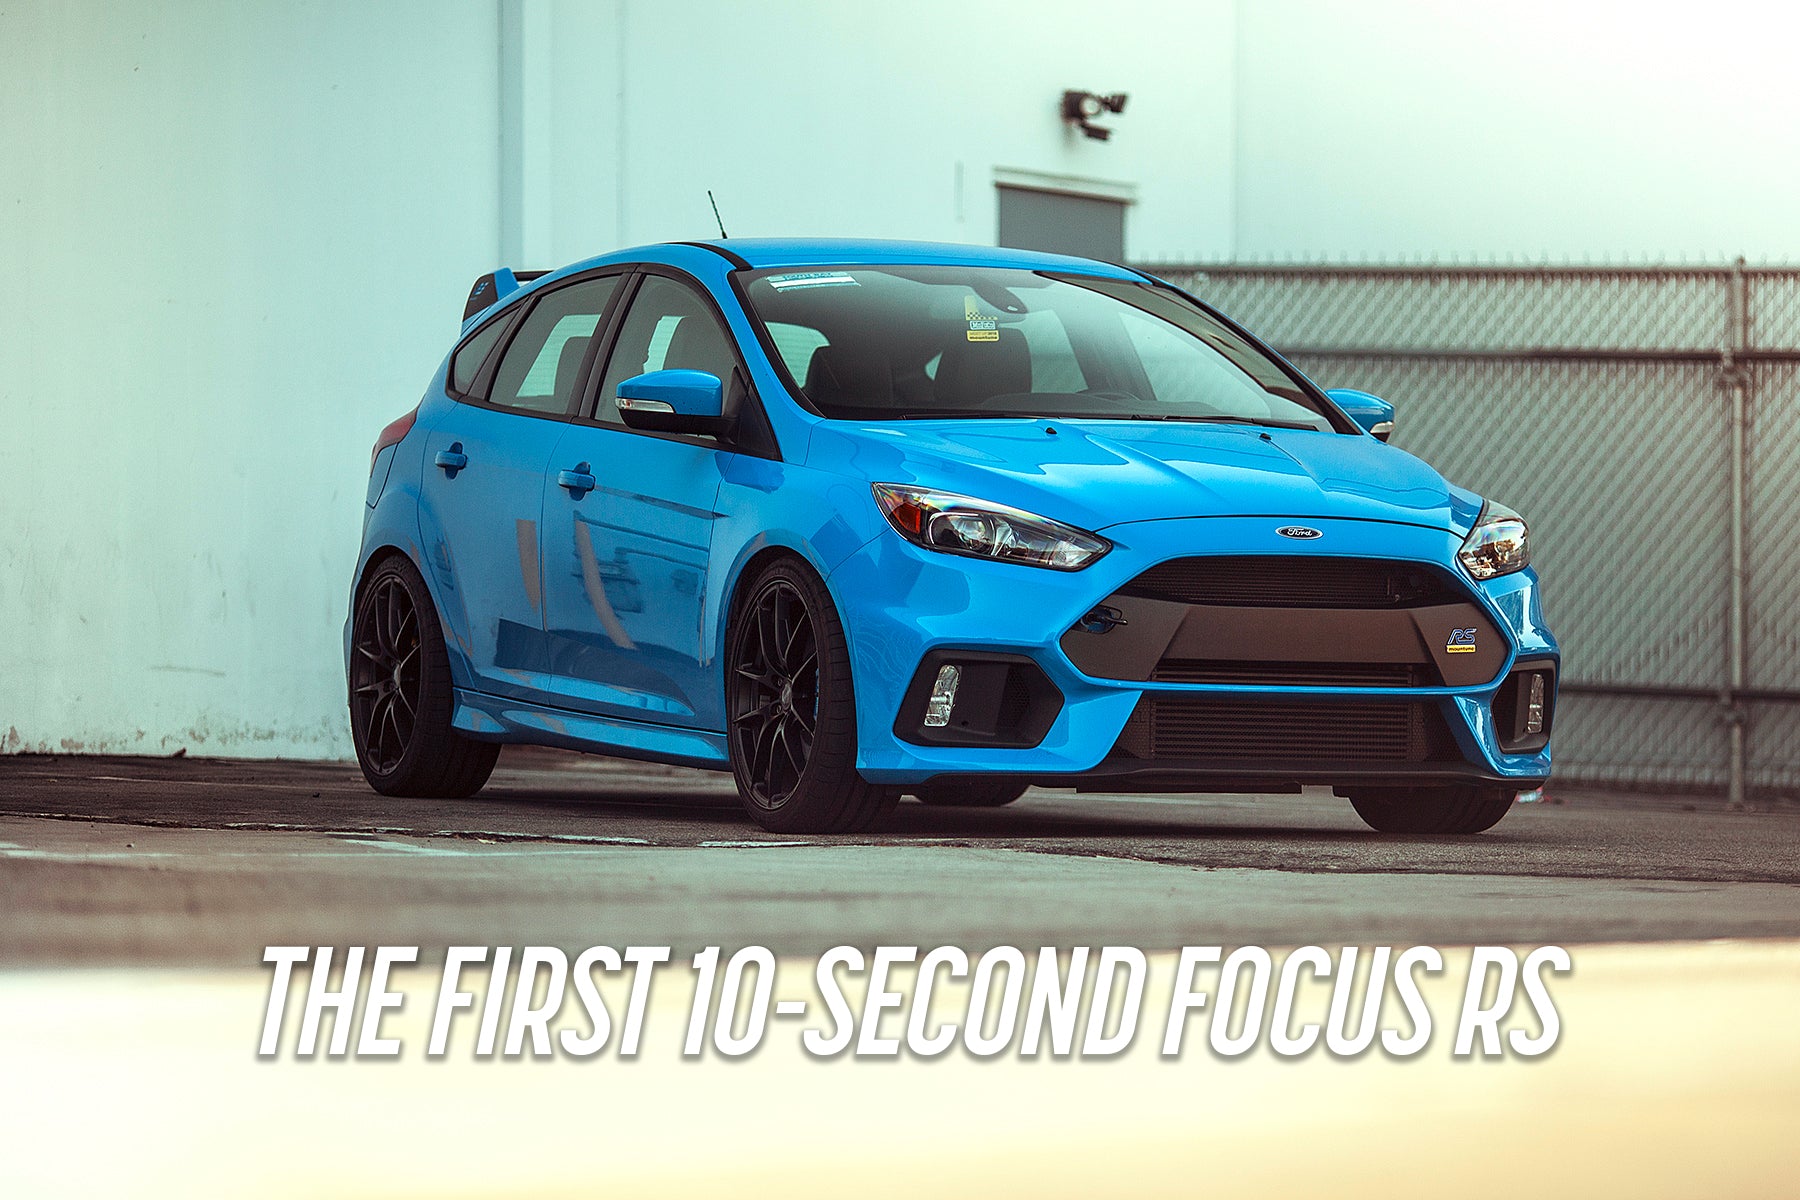 Mountune USA built the fastest MK3 Focus RS over 3 years ago and still